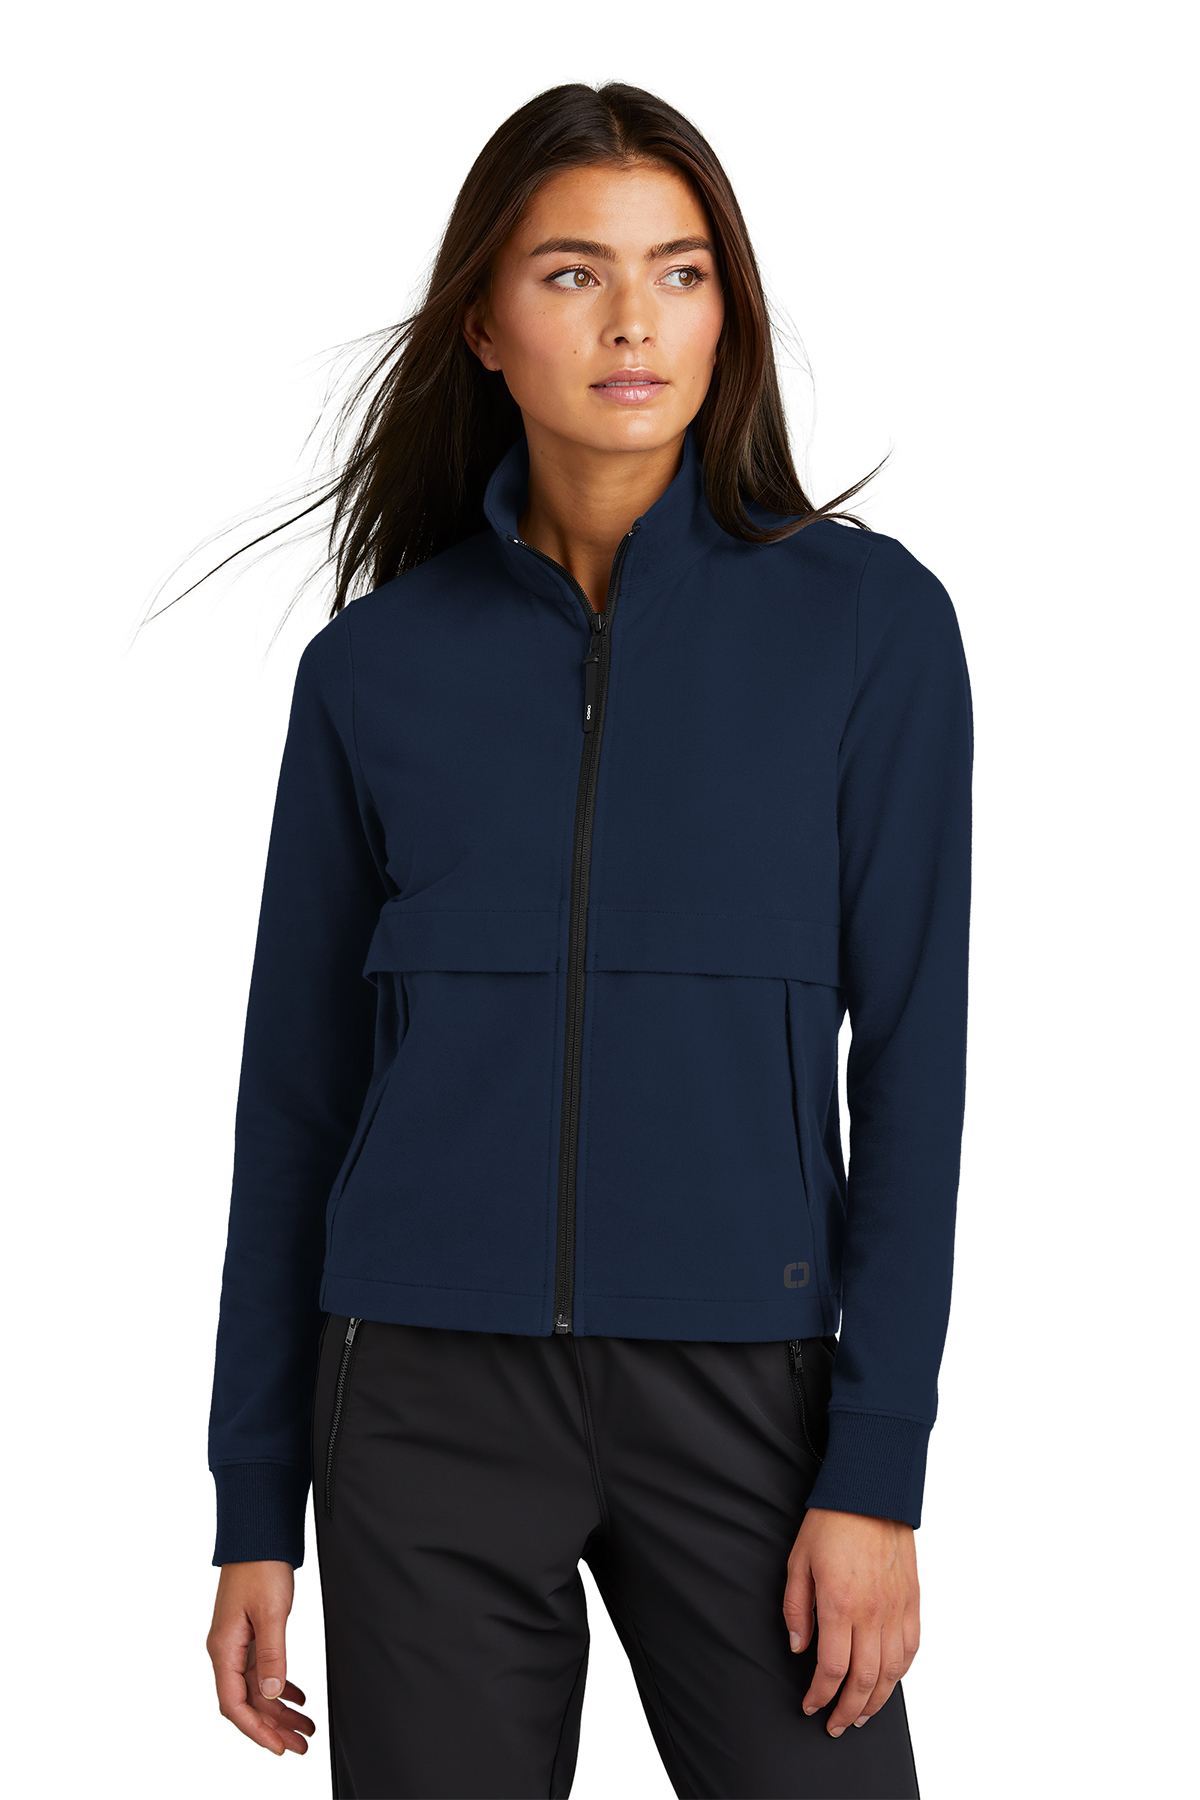 OGIO Ladies Outstretch Full-Zip | Product | Company Casuals